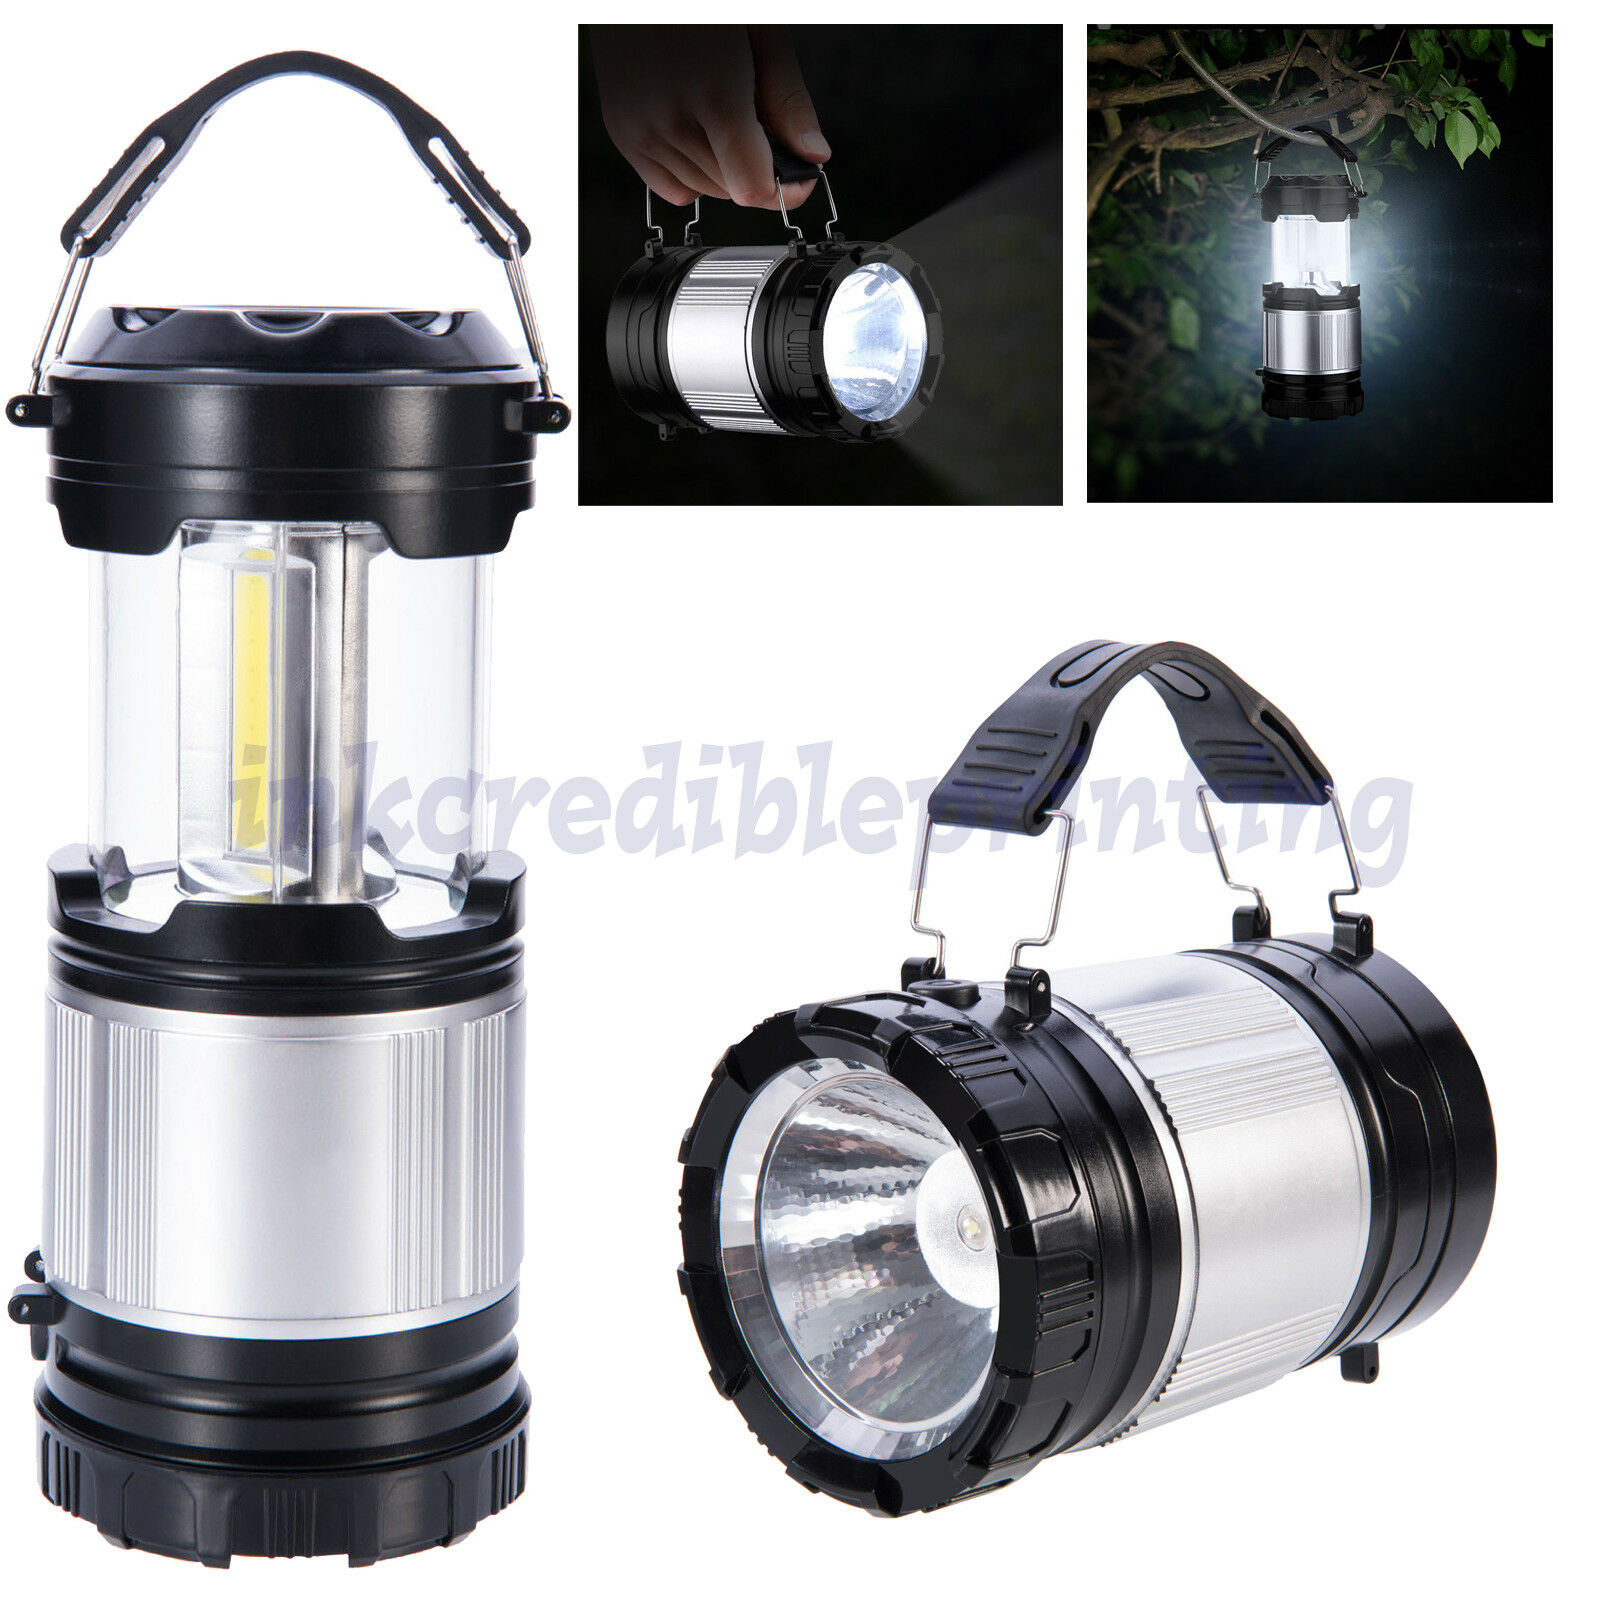 2 In 1 Led Camping Lantern, Cob Light Ultra Bright Collapsible Lamp Portable